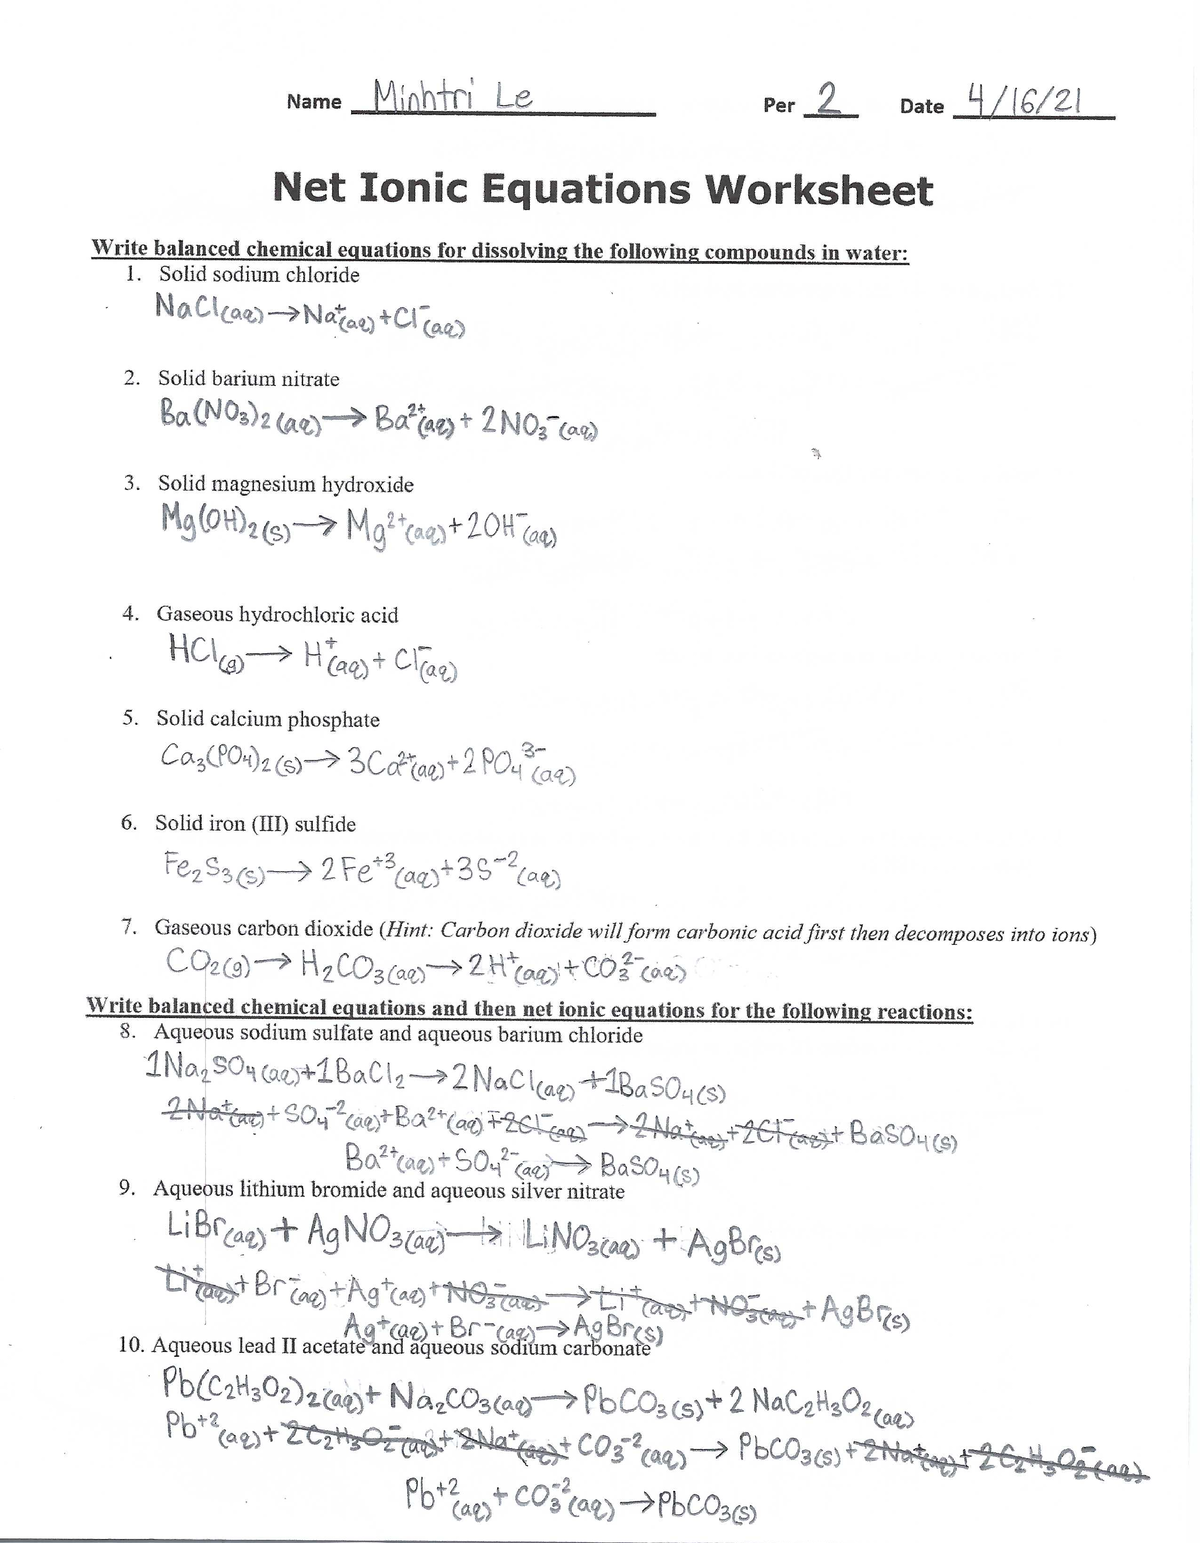 how-to-write-complete-and-net-ionic-equations-chemistry-worksheet